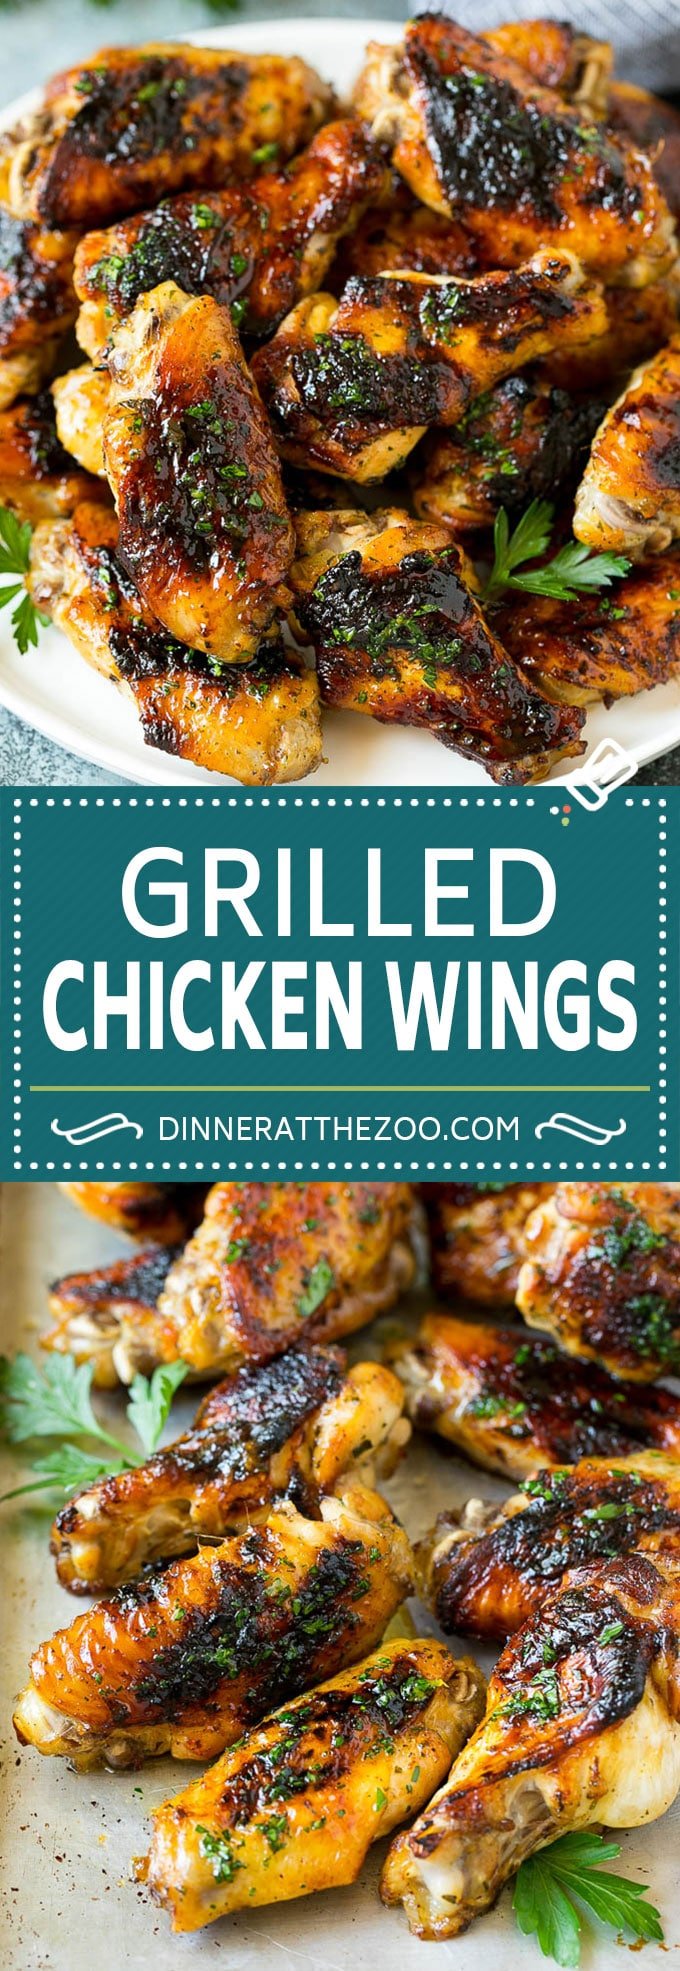 Grilled Chicken Wings | Marinated Chicken Wings | Grilled Chicken #chicken #chickenwings #grilling #marinade #dinner #appetizer #dinneratthezoo